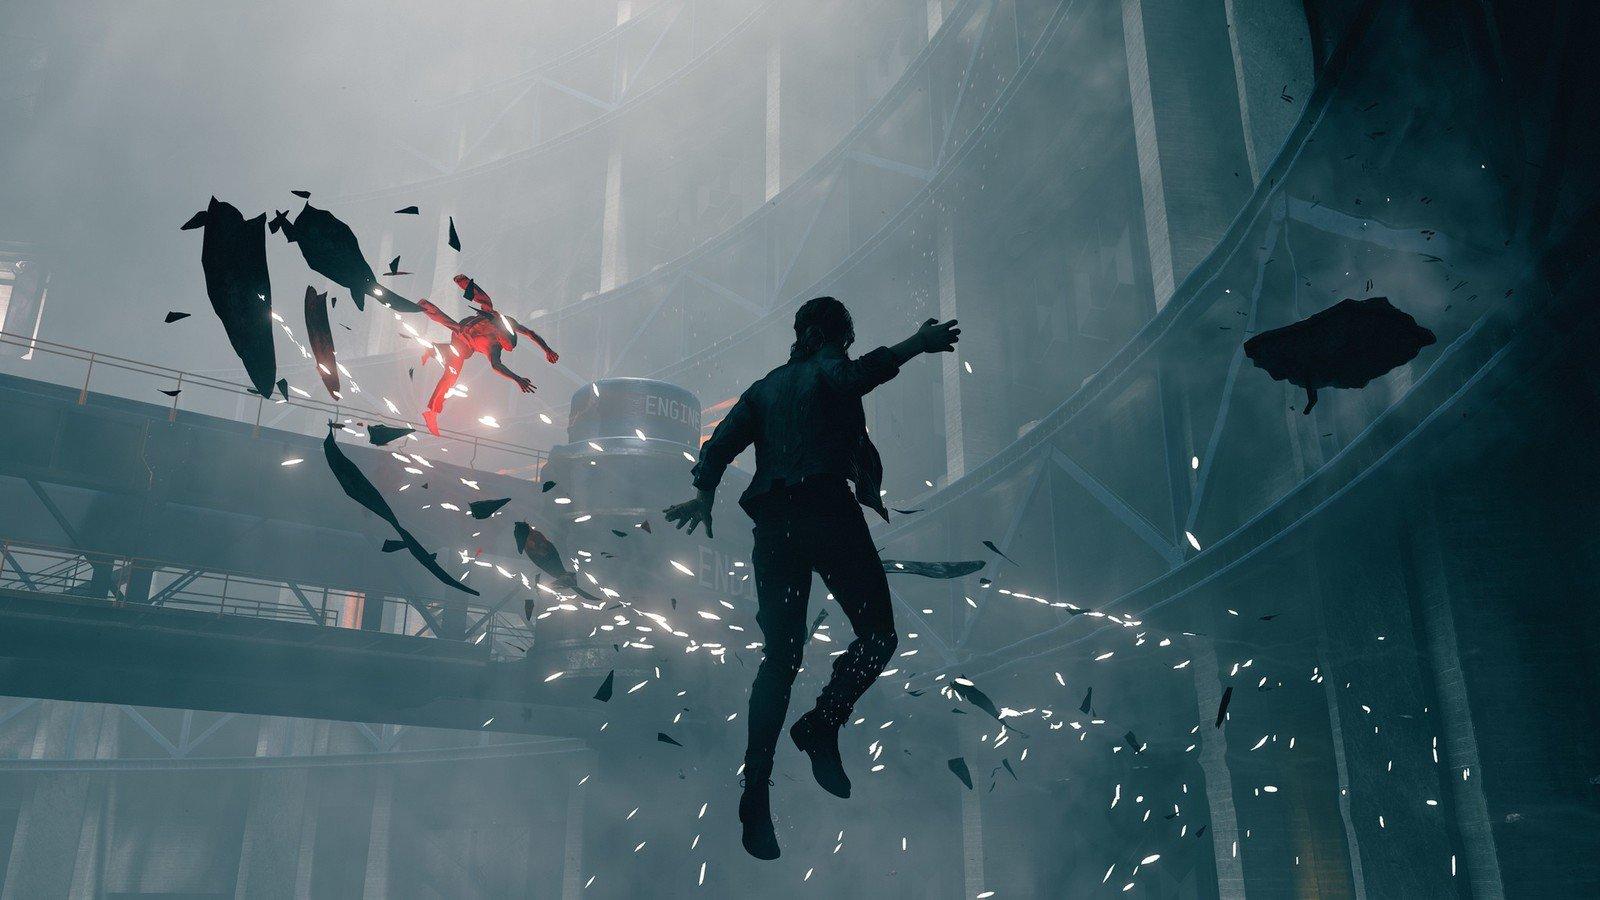 Supernatural shooter 'Control' gets first gameplay footage from E3